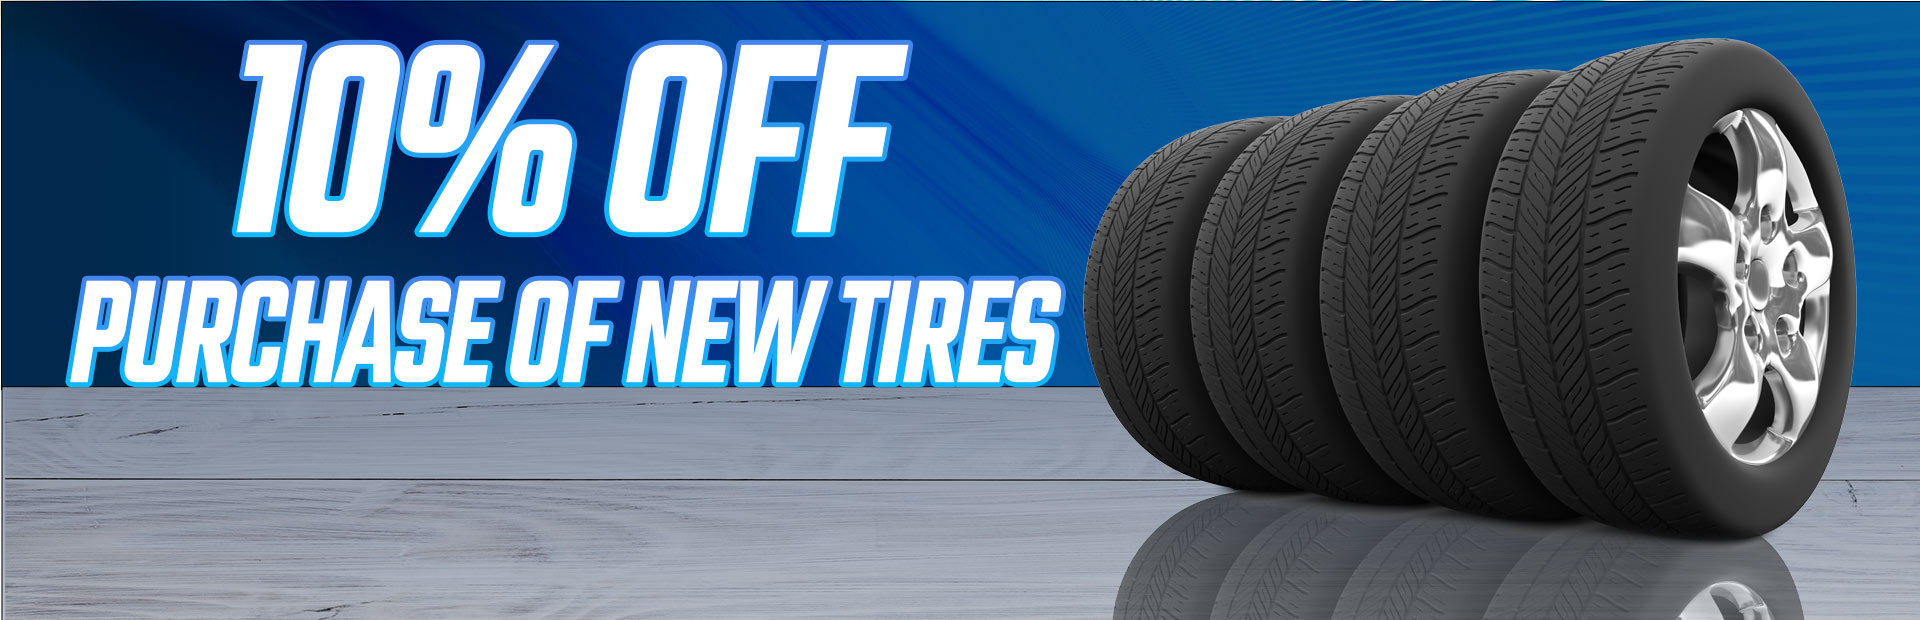 10% Off Purchase of New Tires